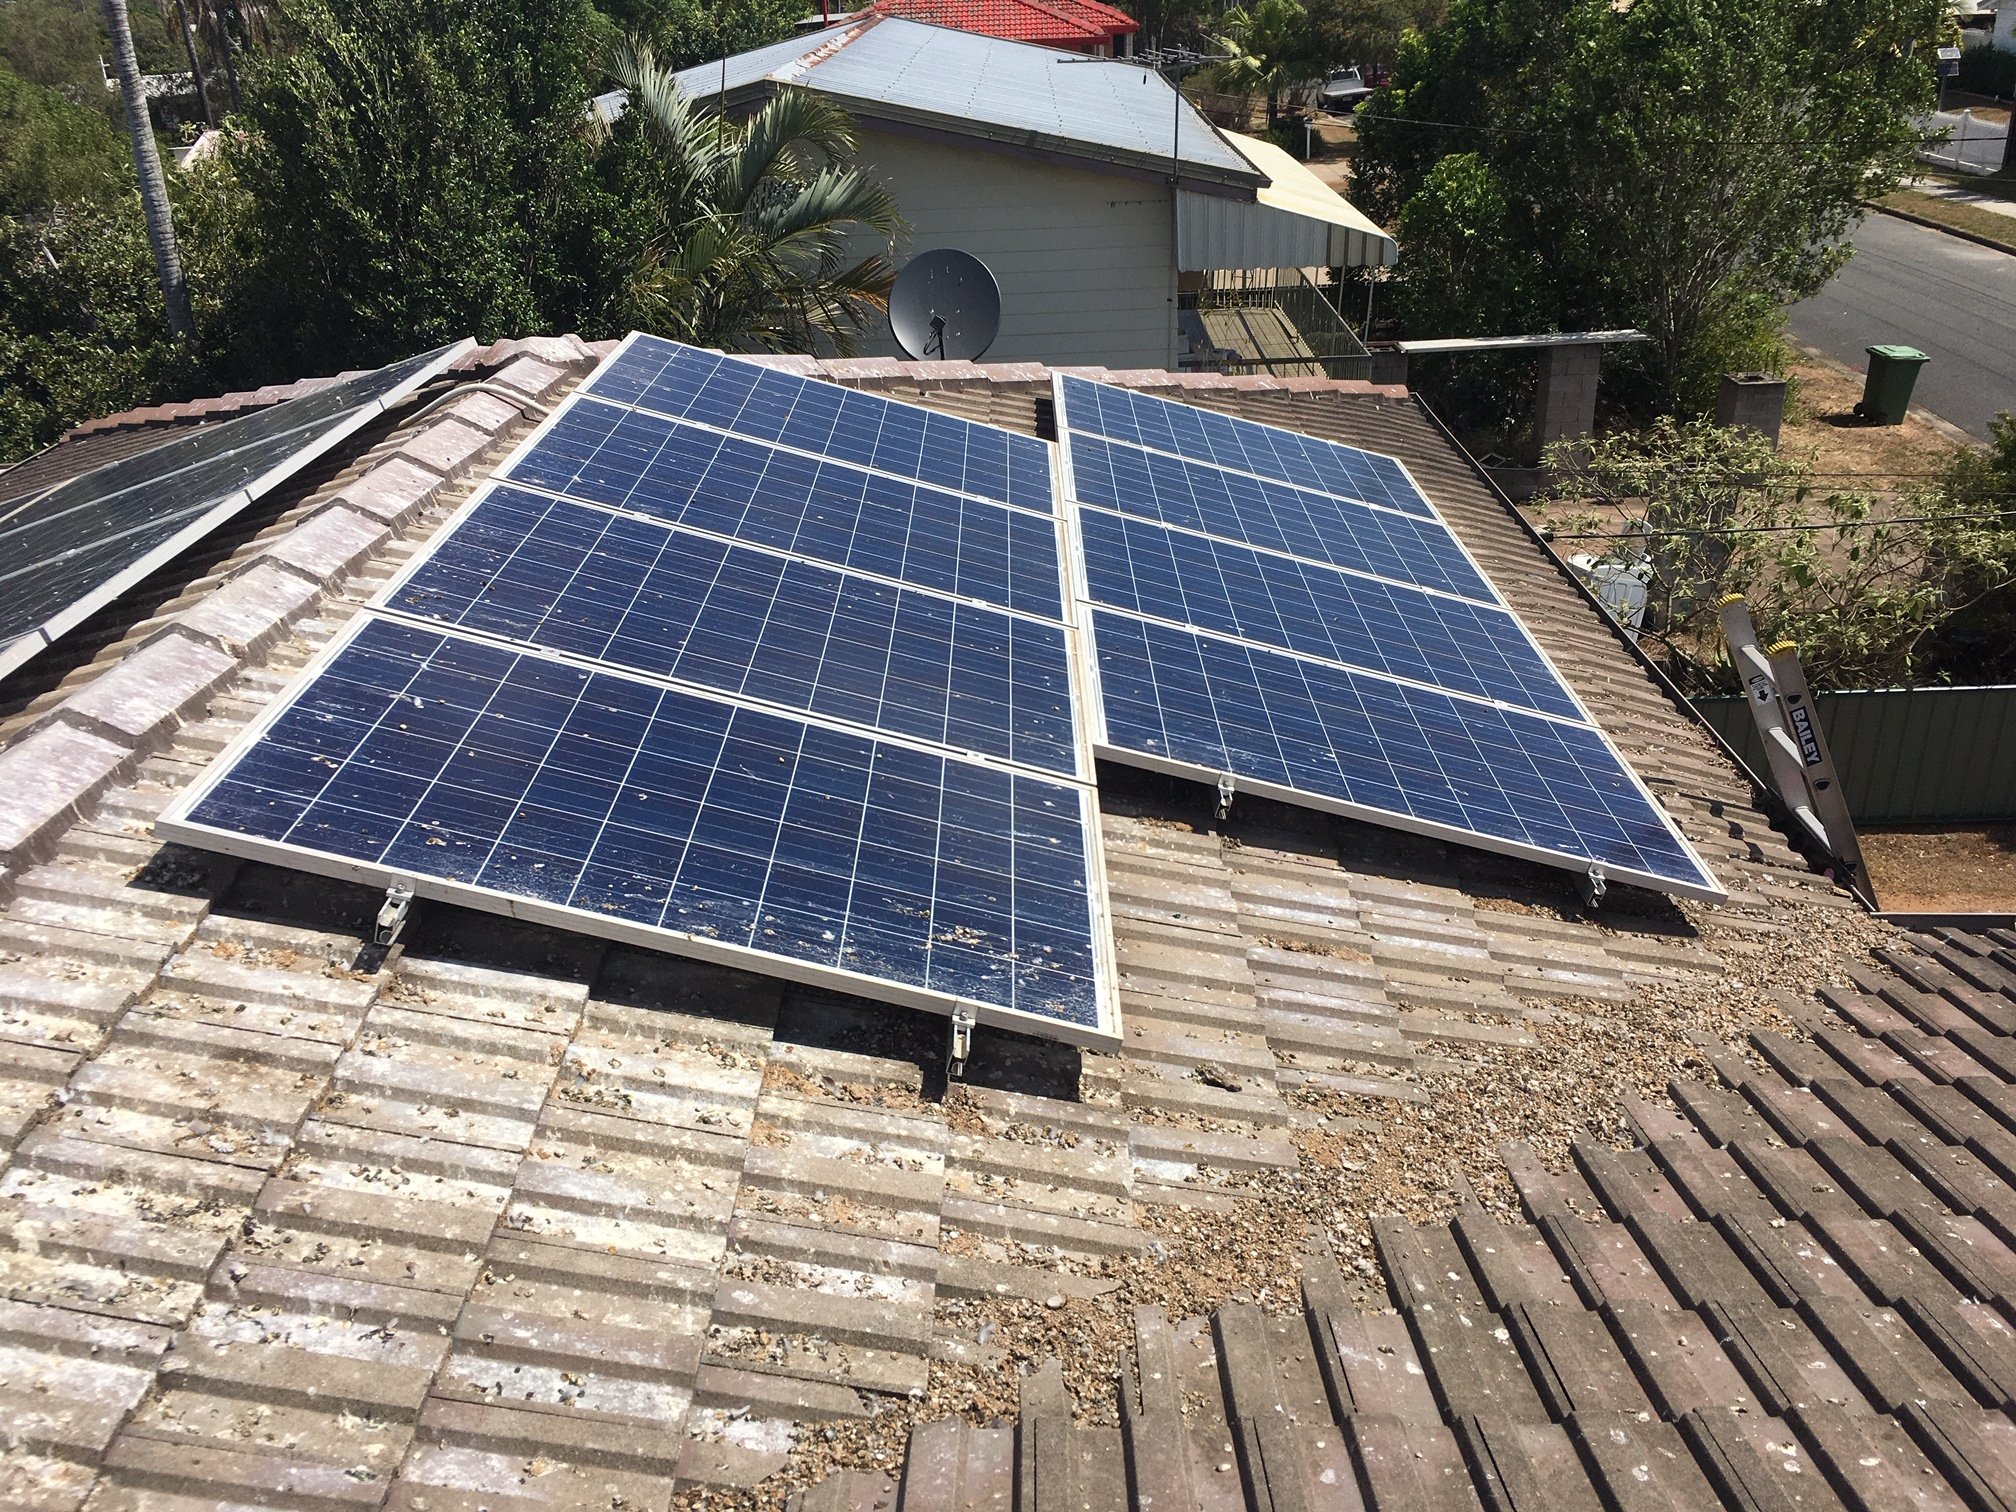 Do you have to clean solar panels before proofing?